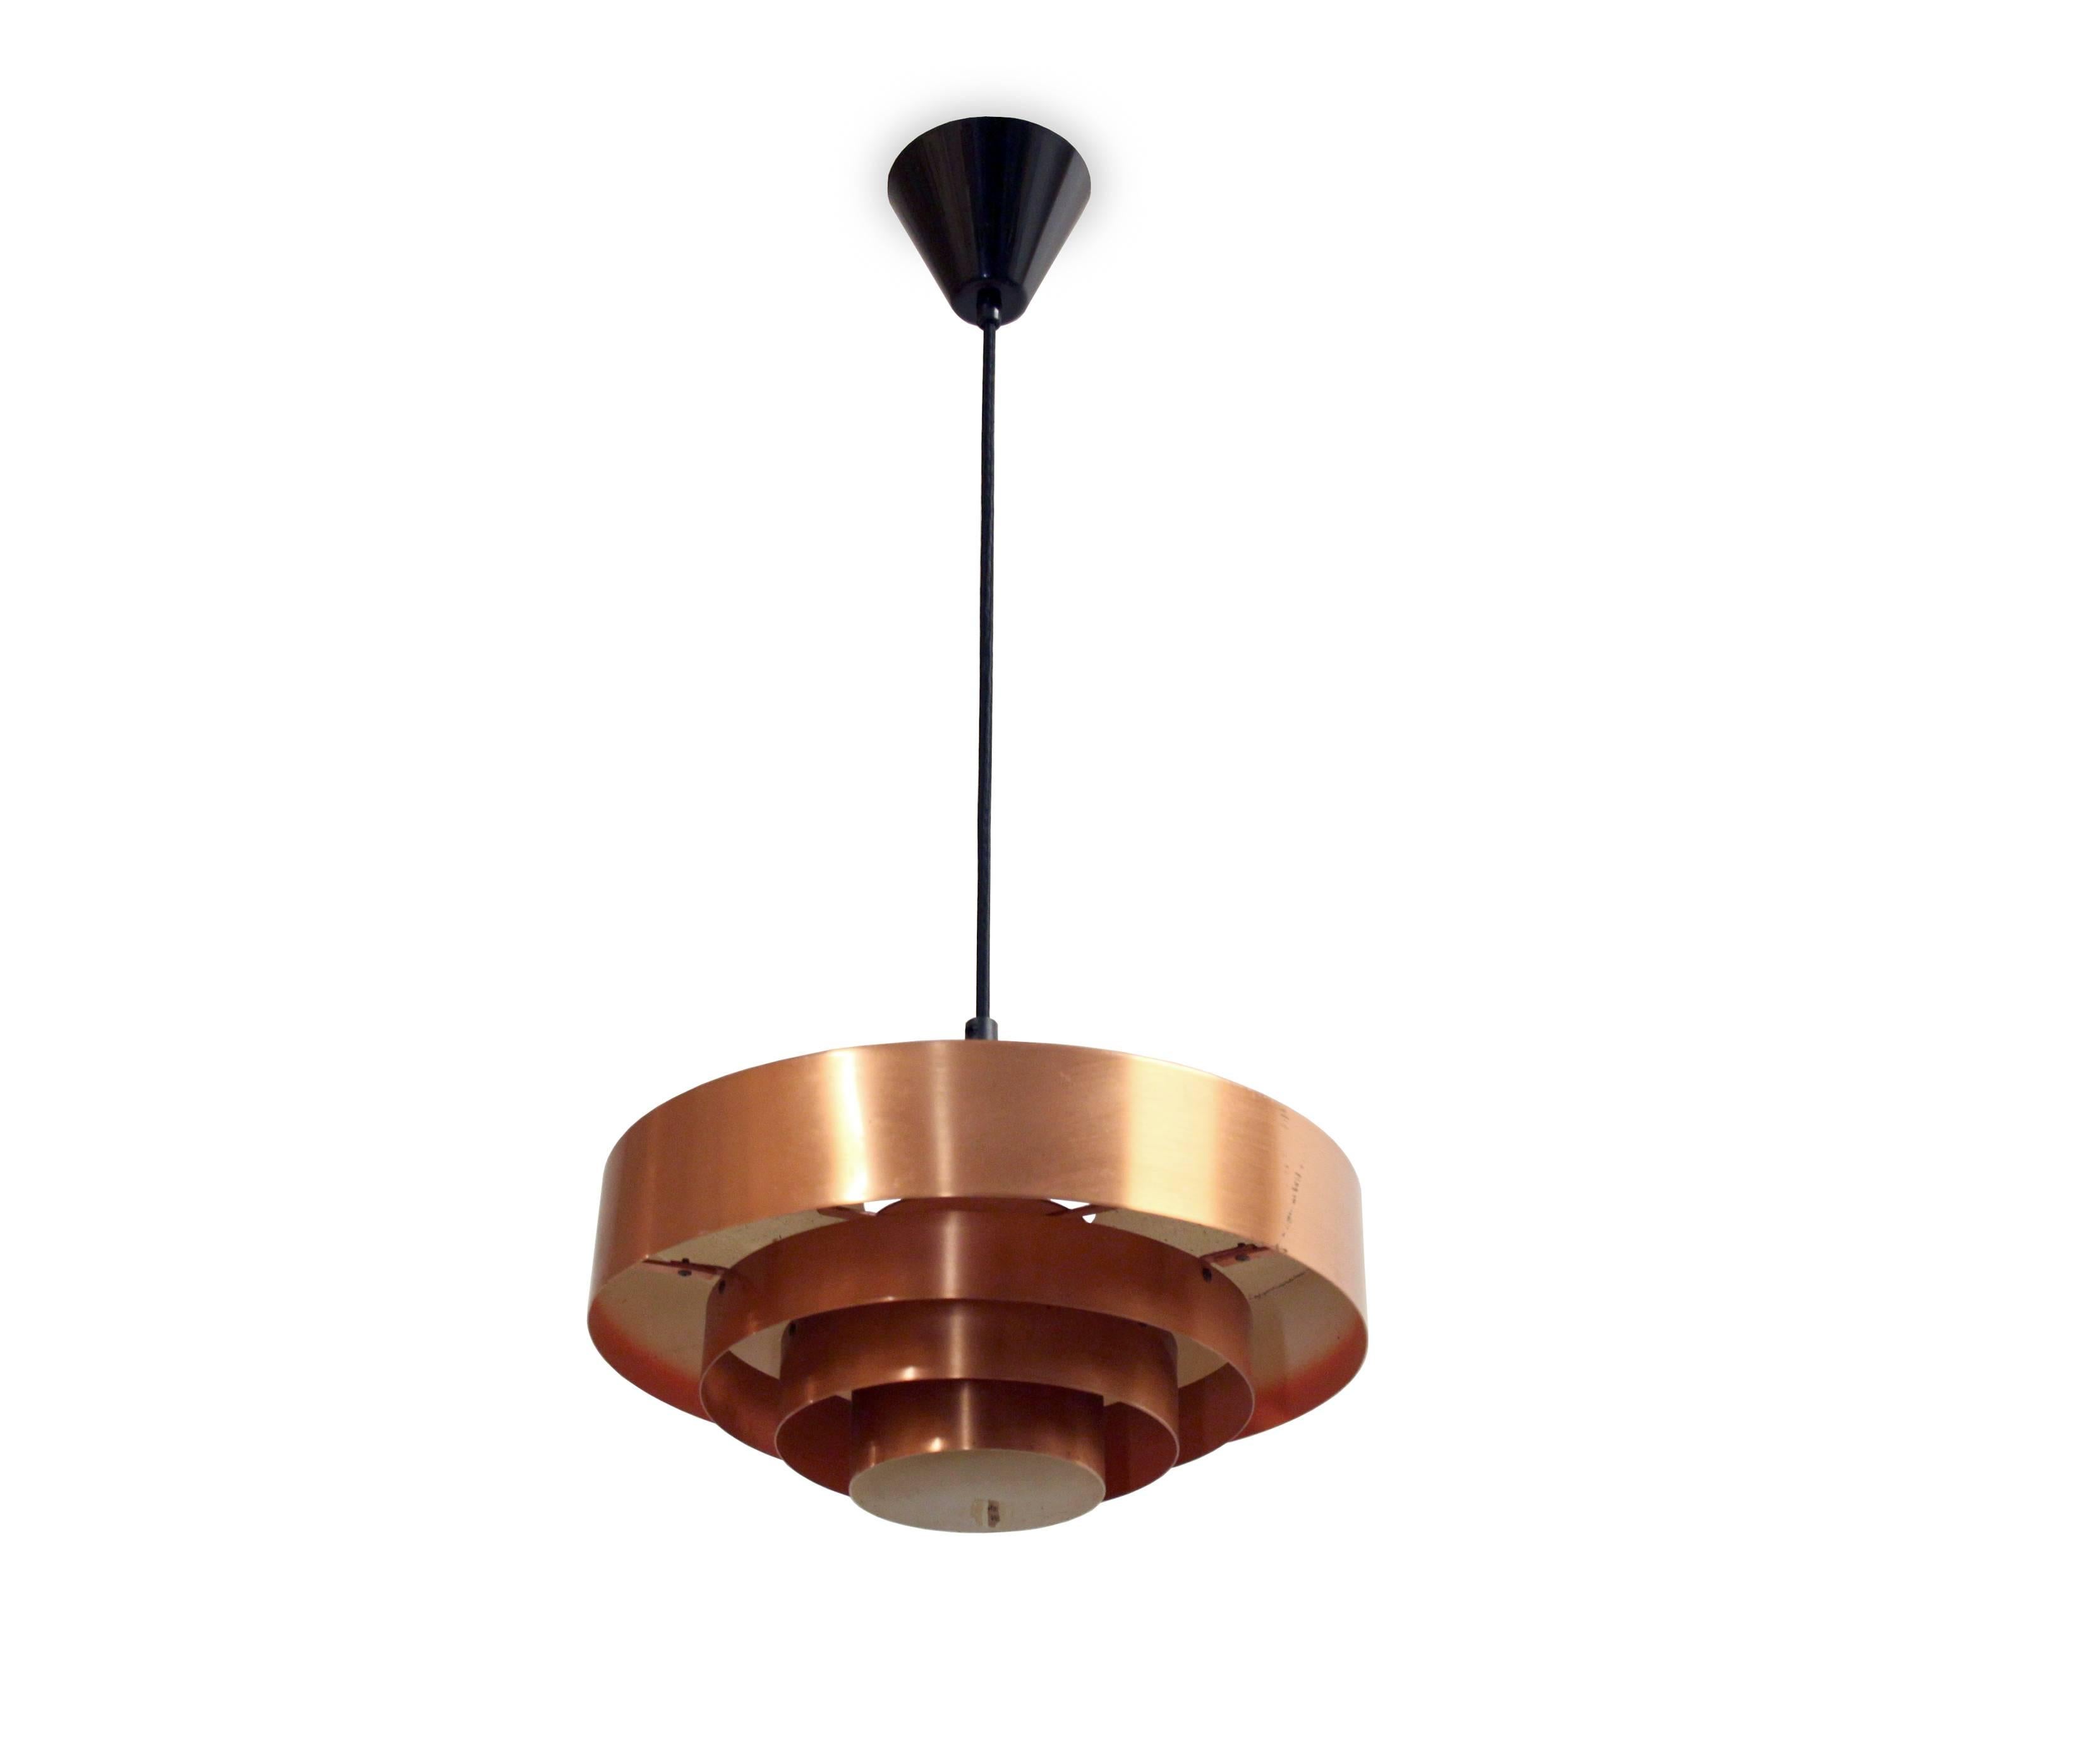 Wonderful ceiling lamp in massive copper. Designed by Jo Hammerborg and made in Denmark by Fog & Mørup from 1957. The lamp is fully working and in excellent vintage condition.